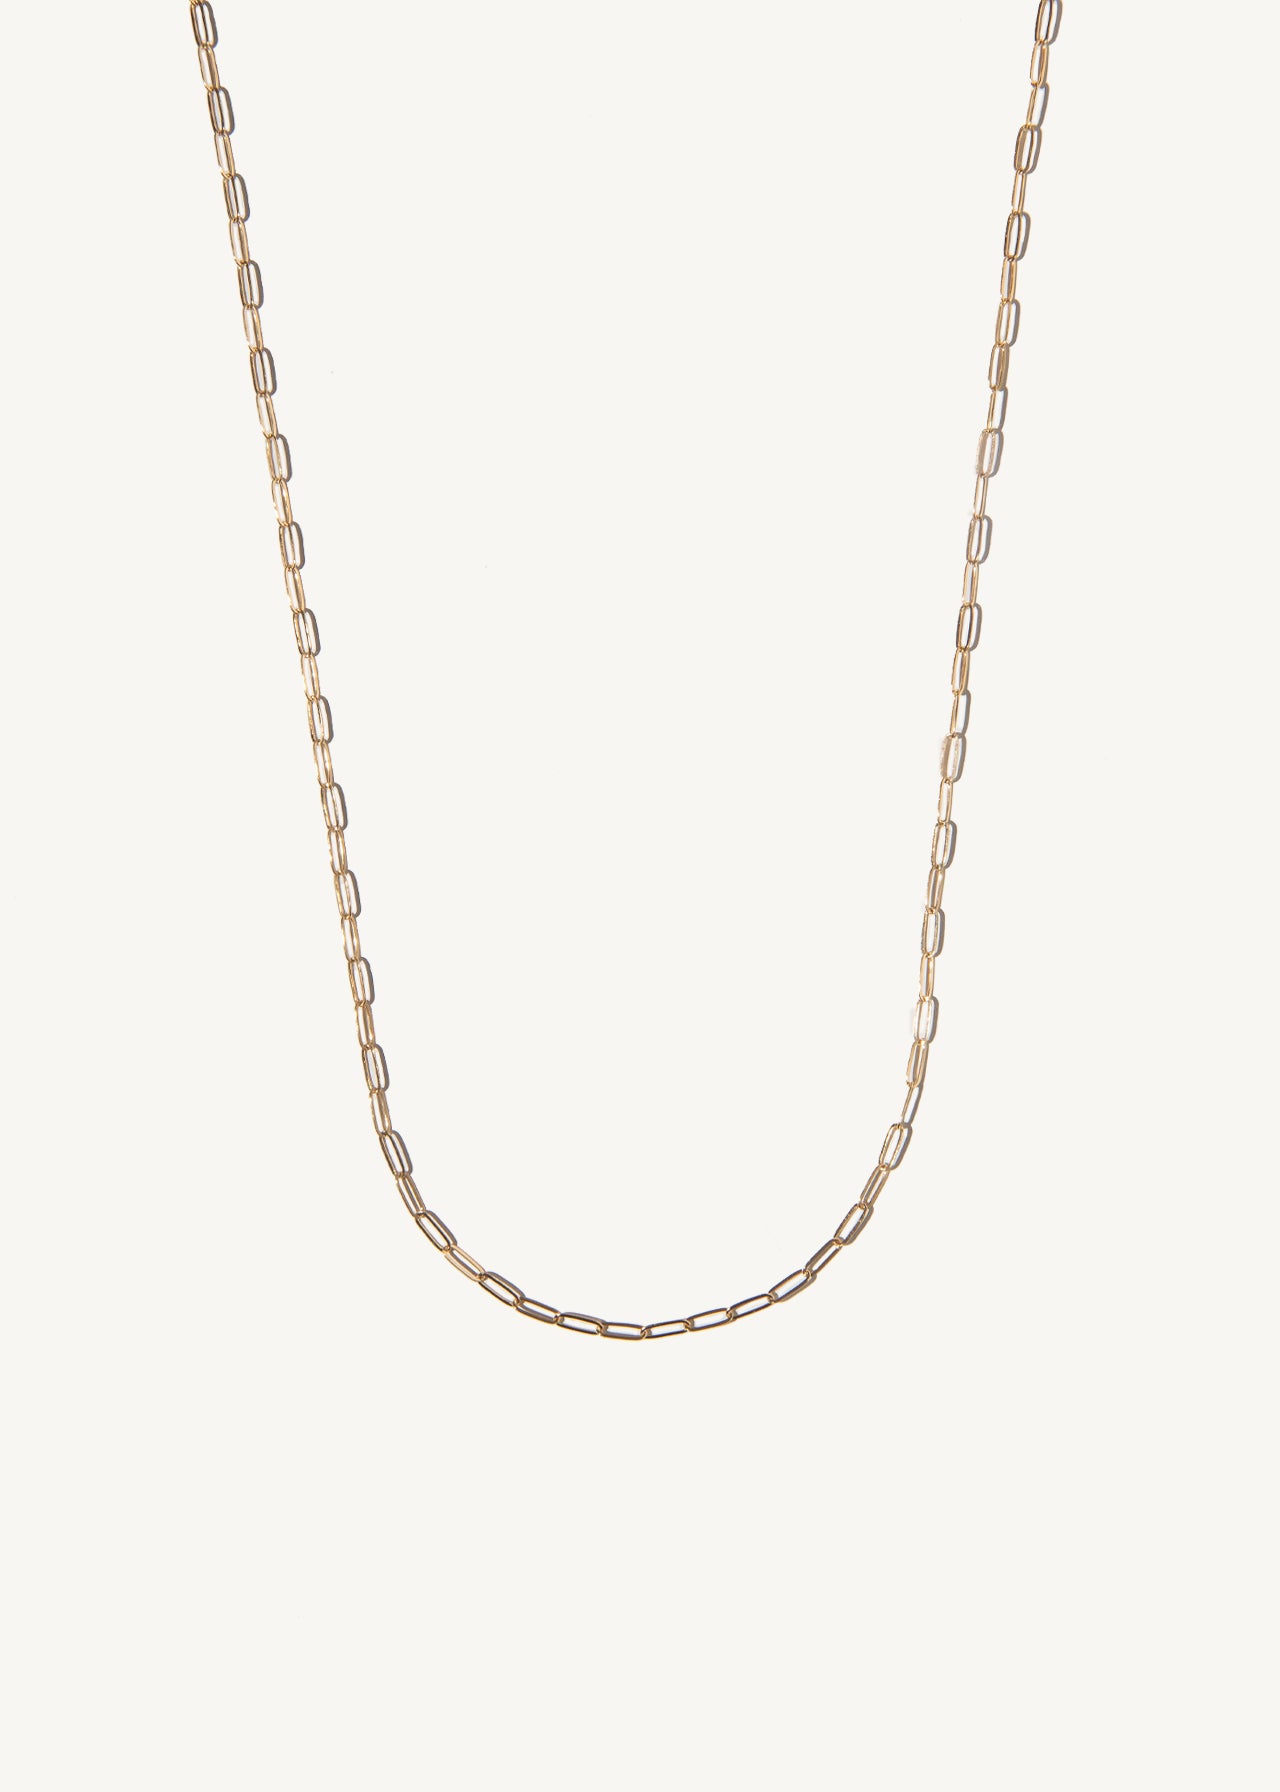 Bryant• Necklace 14k Solid